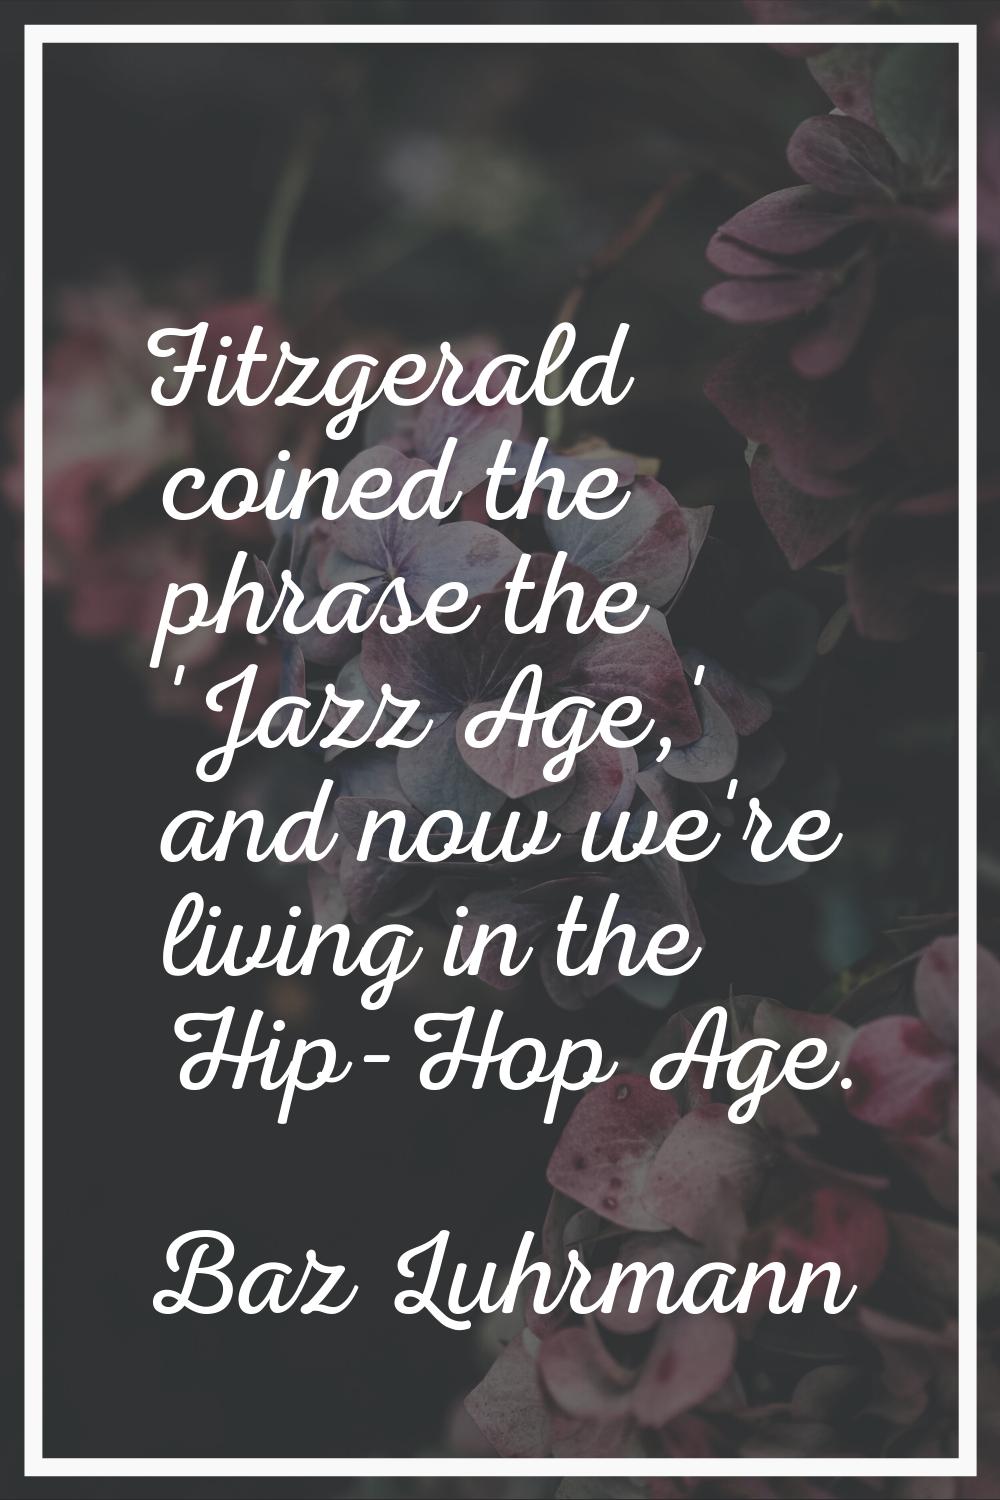 Fitzgerald coined the phrase the 'Jazz Age,' and now we're living in the Hip-Hop Age.